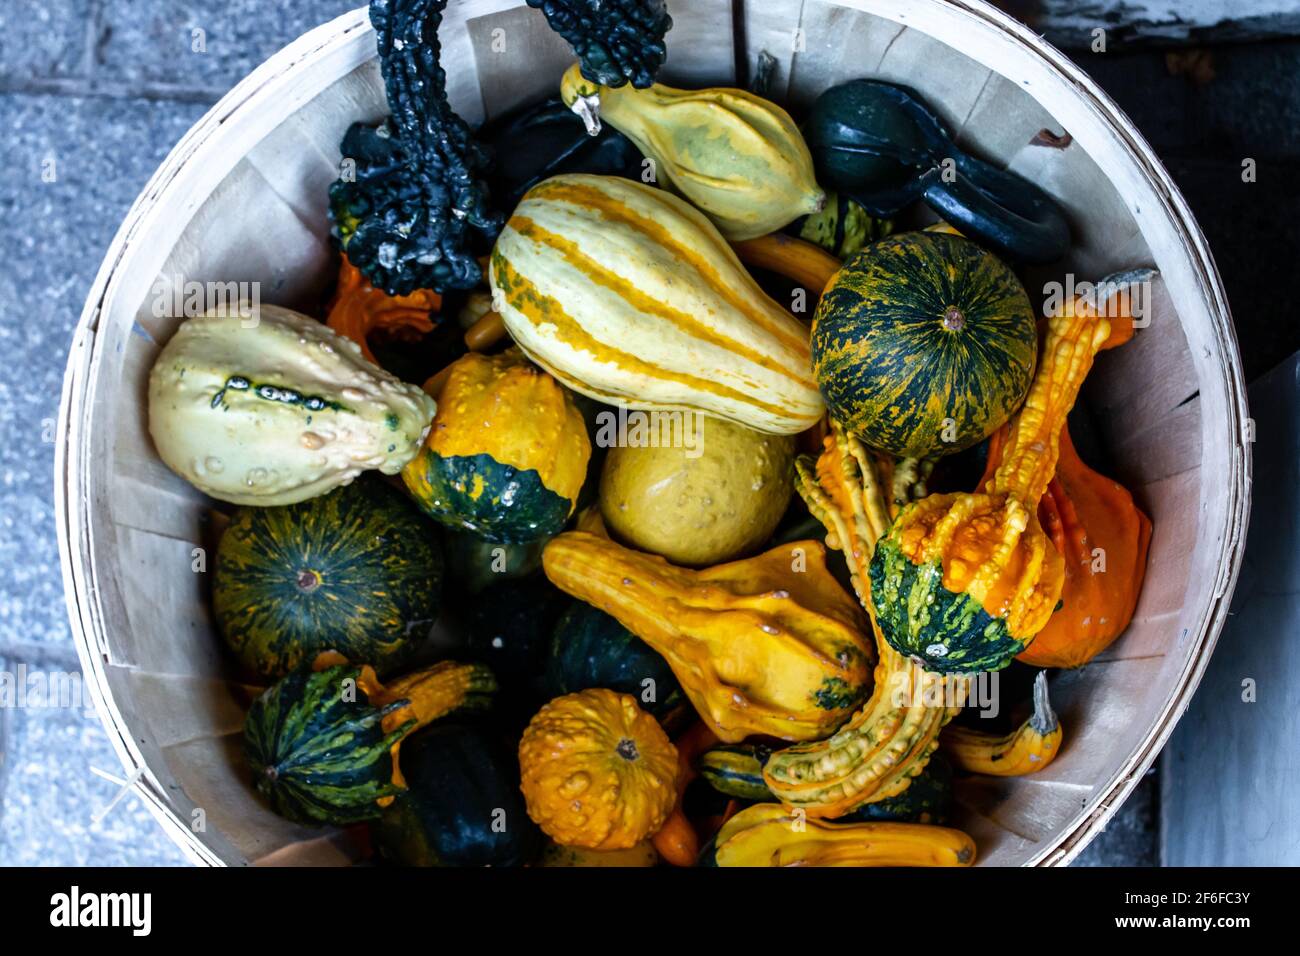 A close-up shot of a basket of Halloween gourds being sold at an autumn farmers market in Toronto, Ontario, Canada in October in time for Thanksgiving. Stock Photo